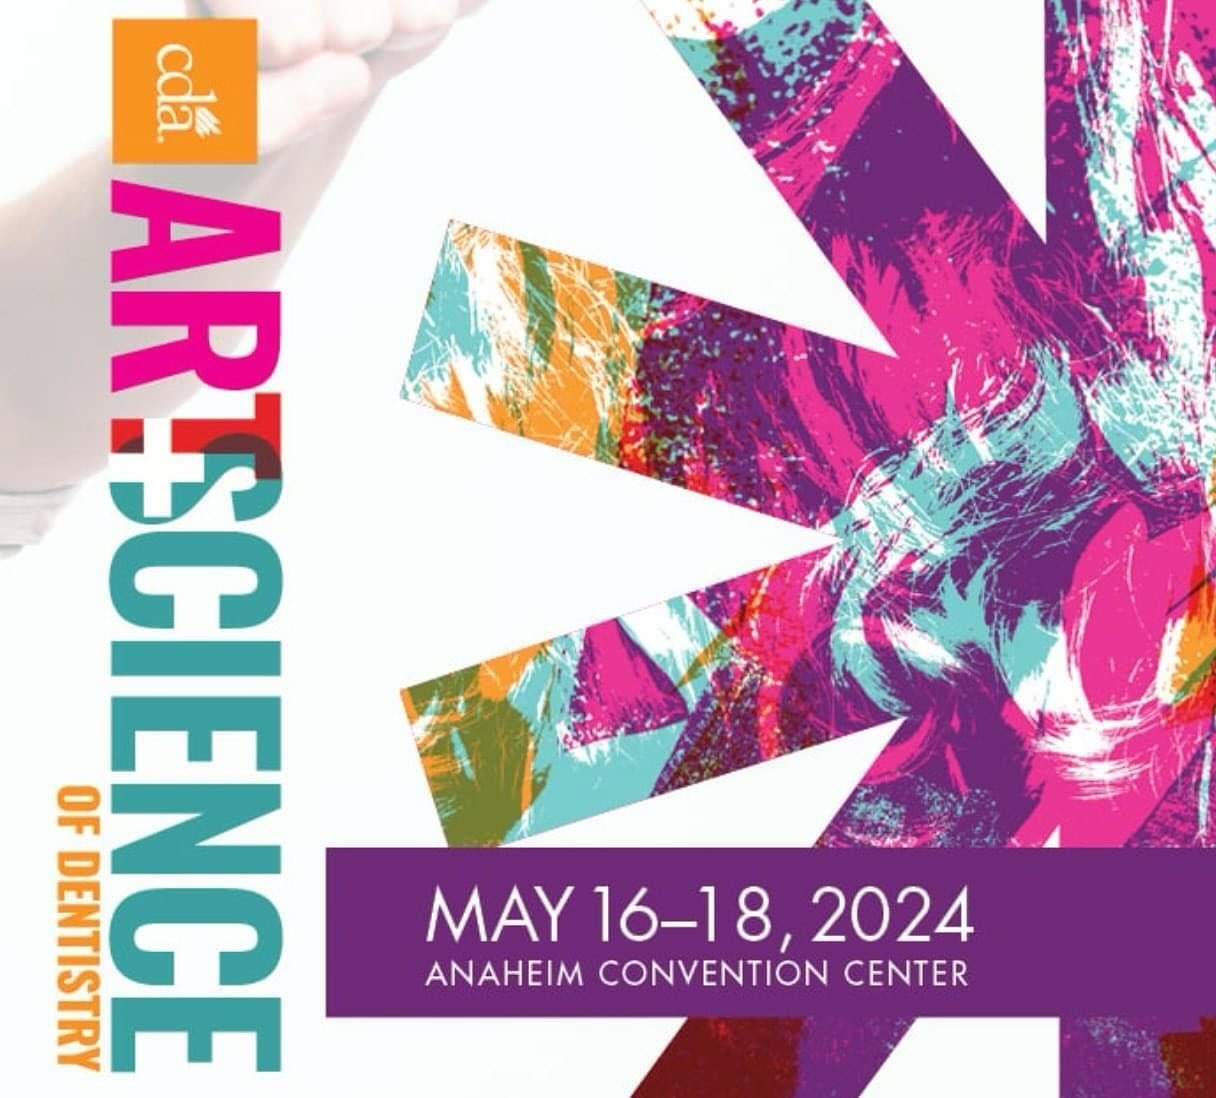 Heading to Anaheim this week to take part in CDA. DM me if you&rsquo;d like to meeet up! @cdadentists #cdapresents

#topdentalevents #topdentalce #topdentalevent #dentalconference